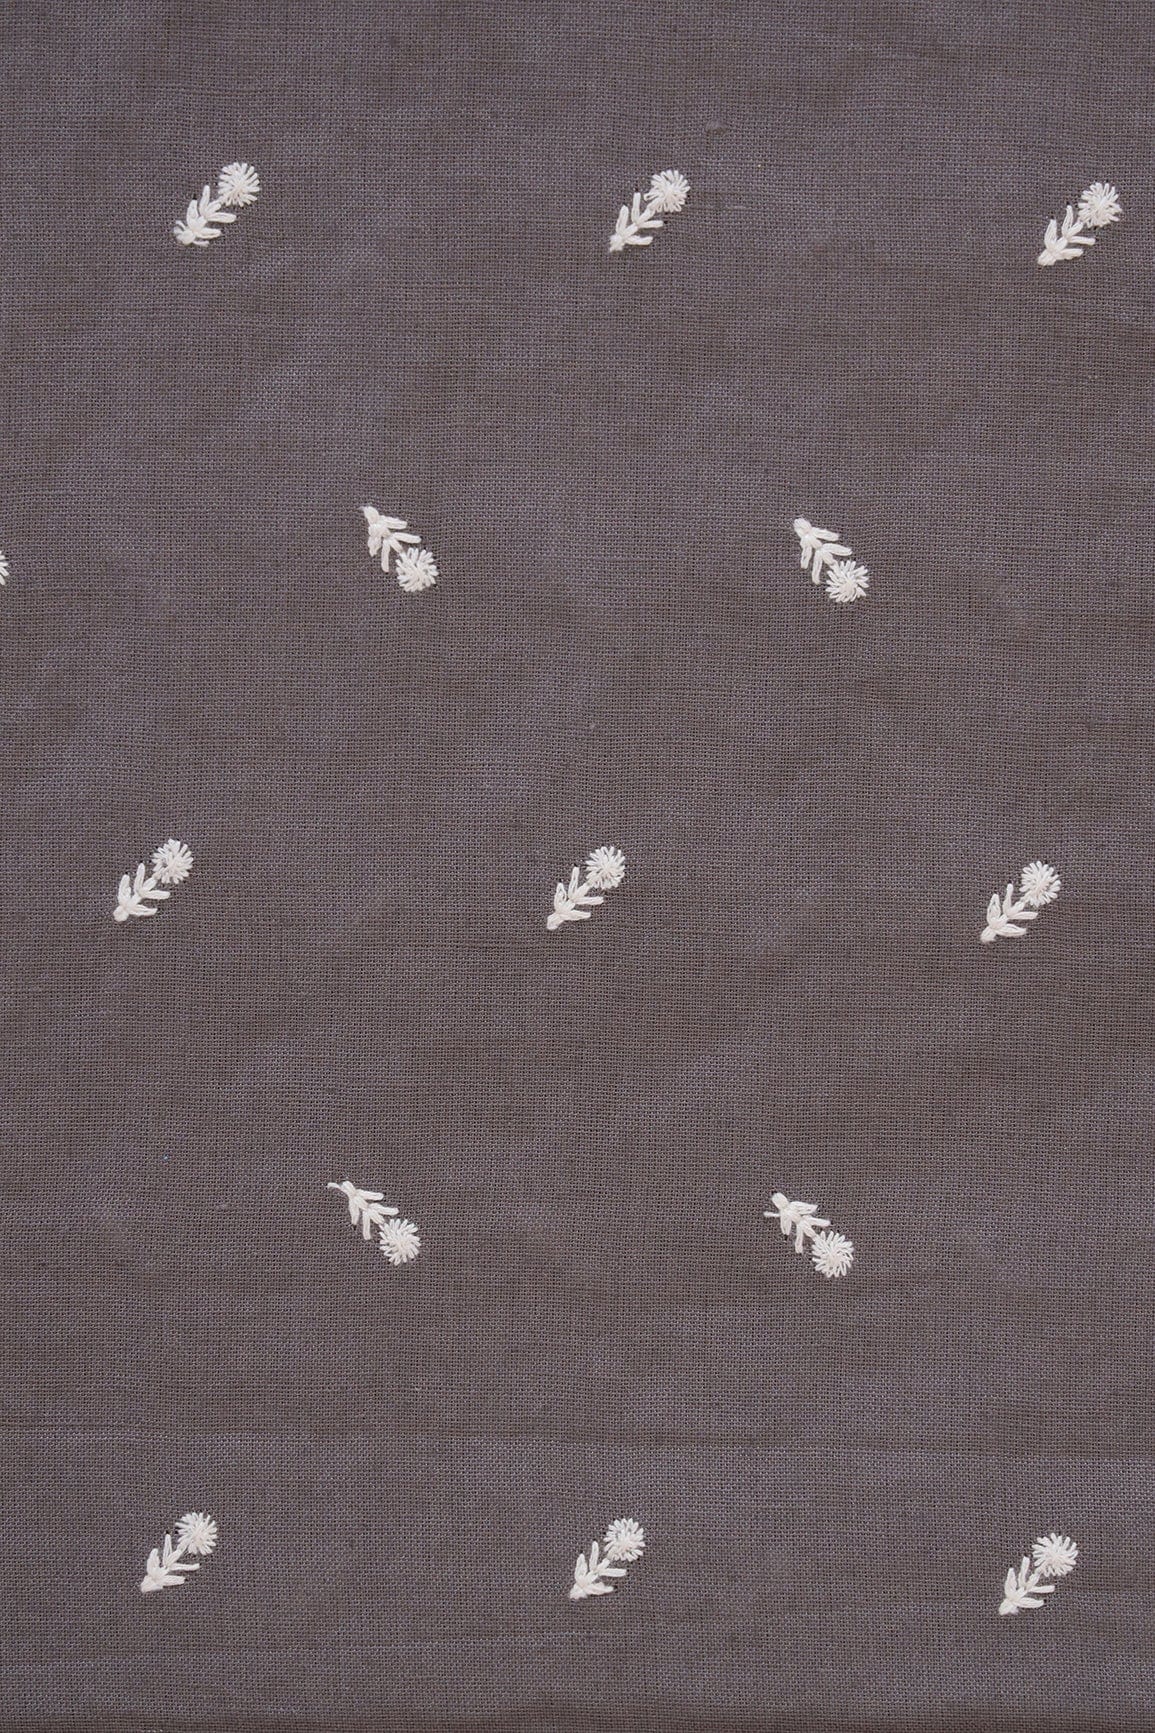 doeraa Embroidery Fabrics White Thread Small Floral Motif Embroidery Work On Dark Grey Cotton Linen Fabric